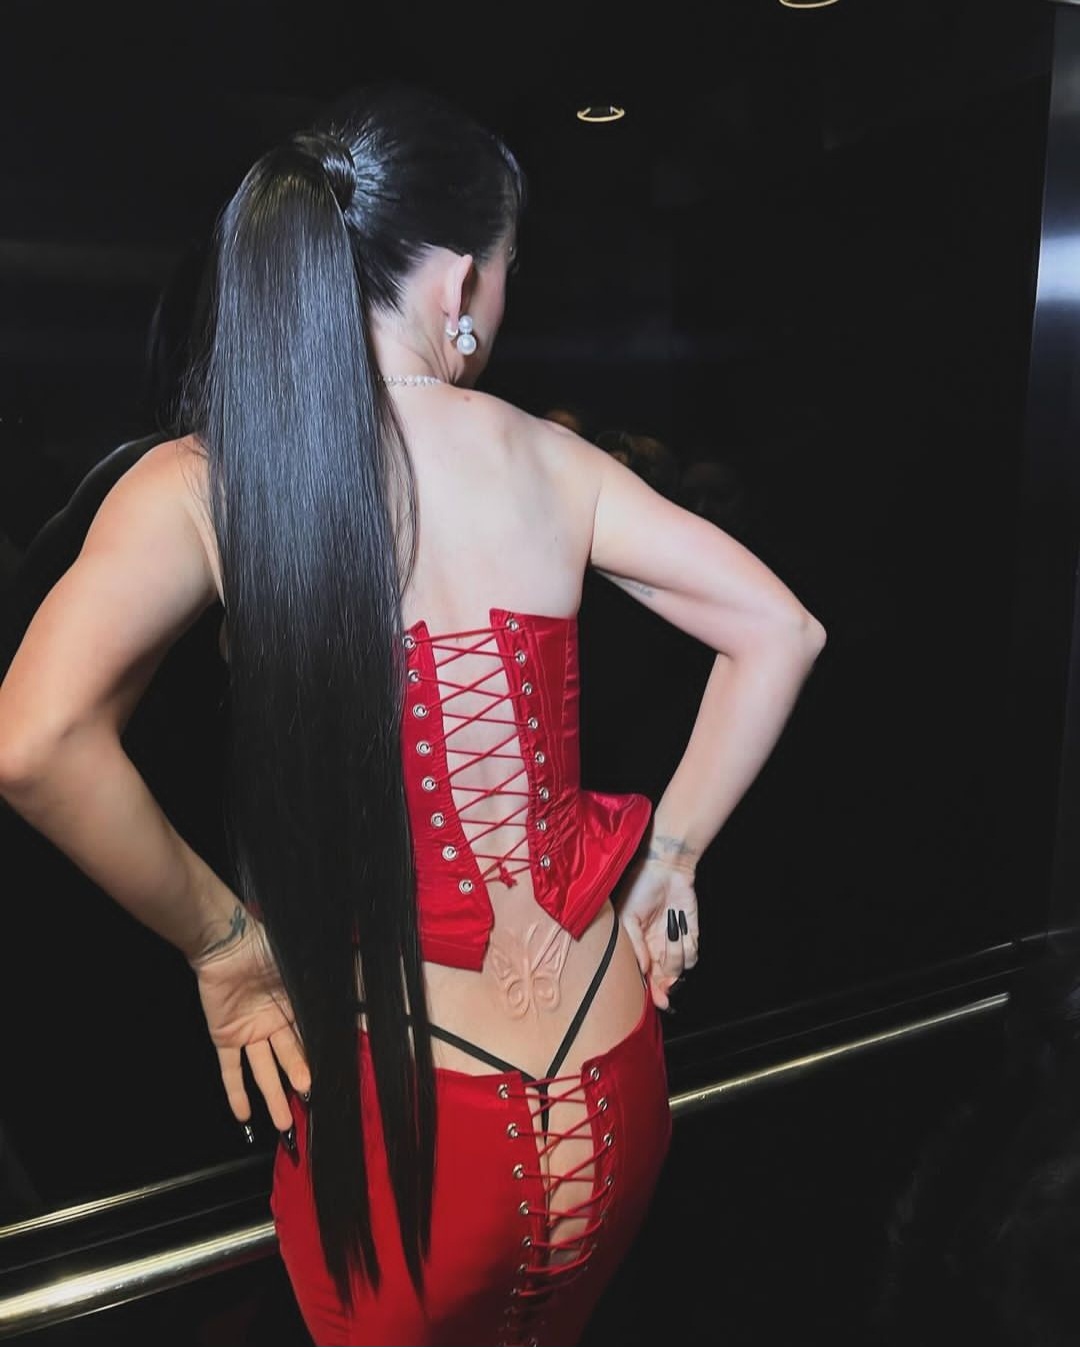 Katy Perry shows off bare bum in lace-up skirt (photos)